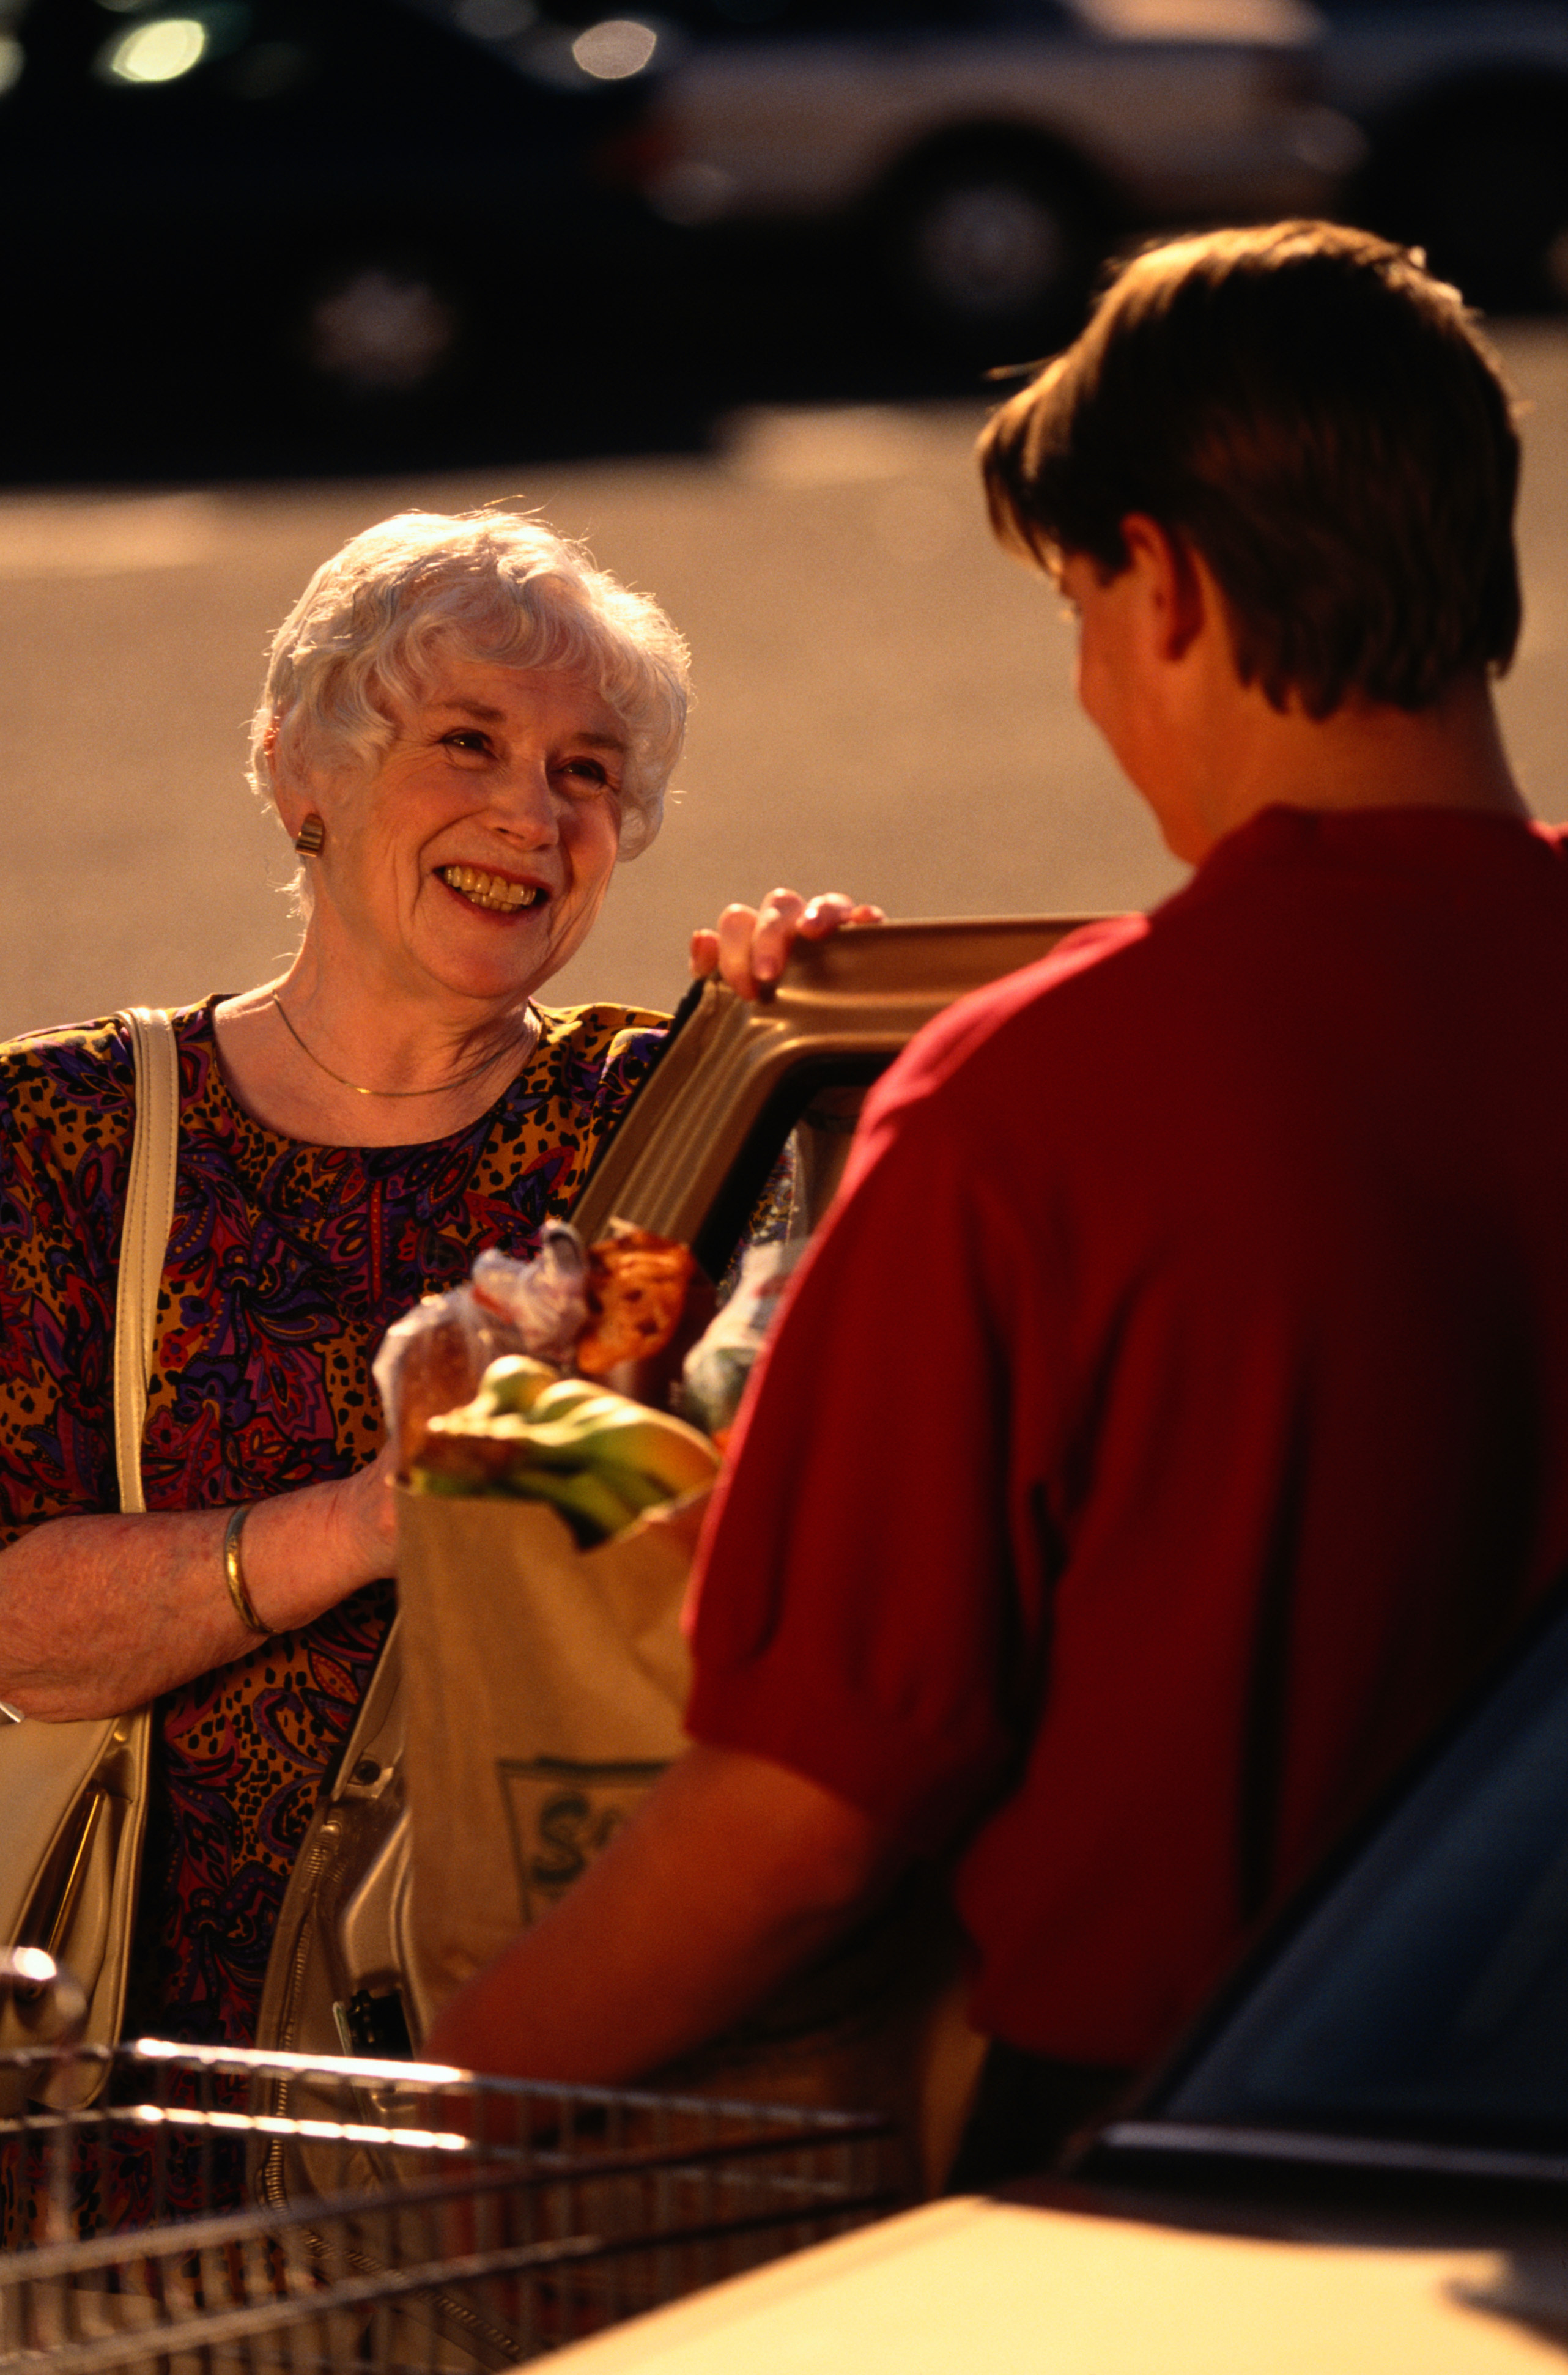 Woman smiling at a young person holding a bag of groceries